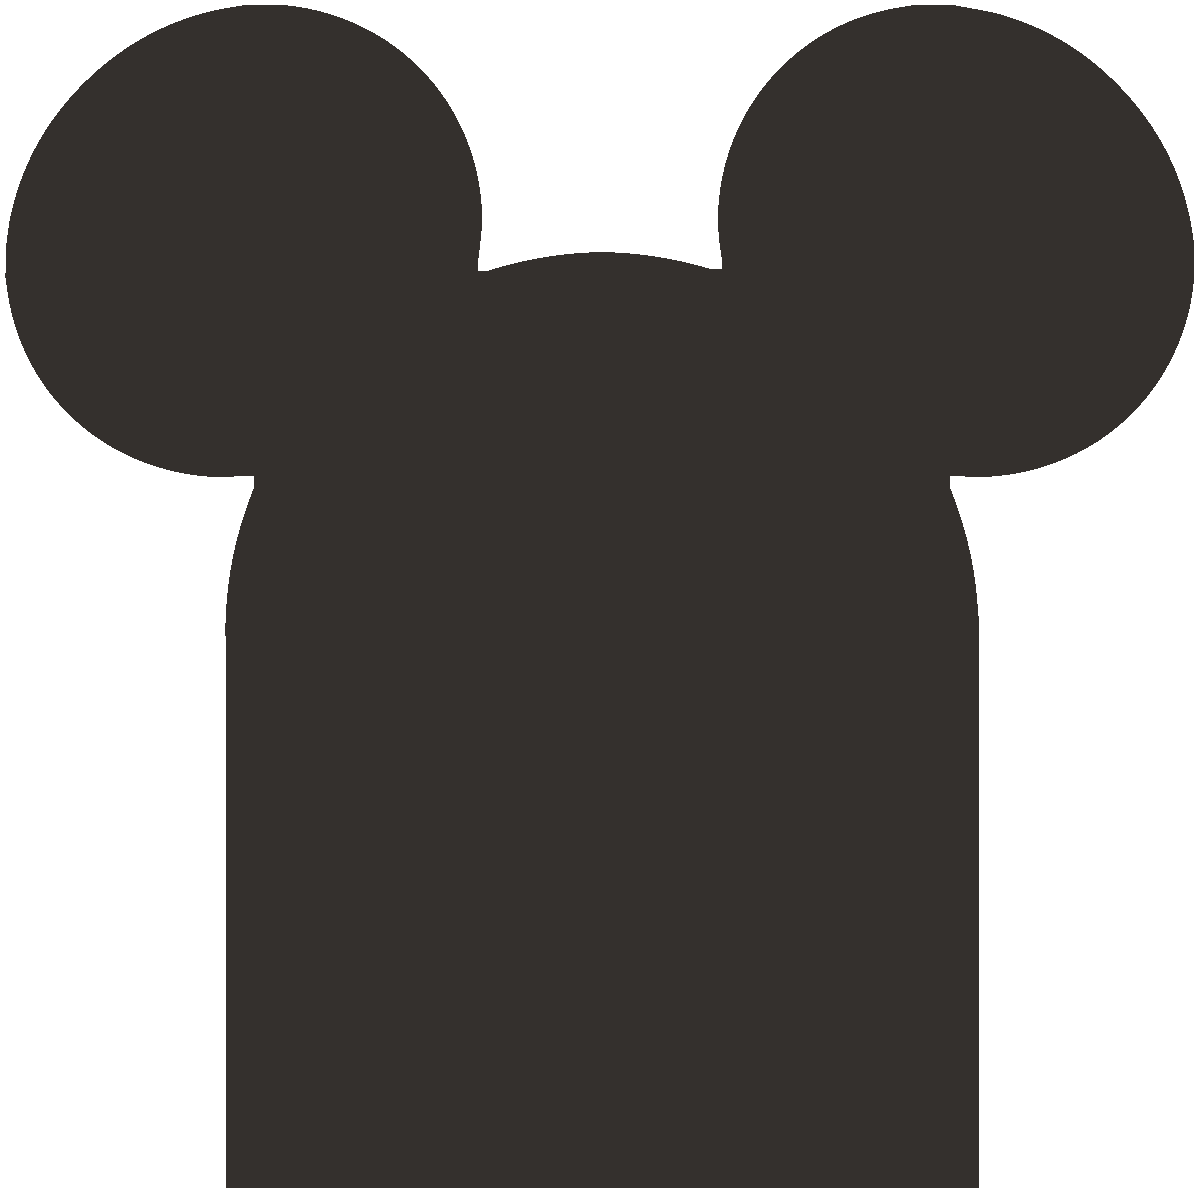 Tombstone with mouse ears.